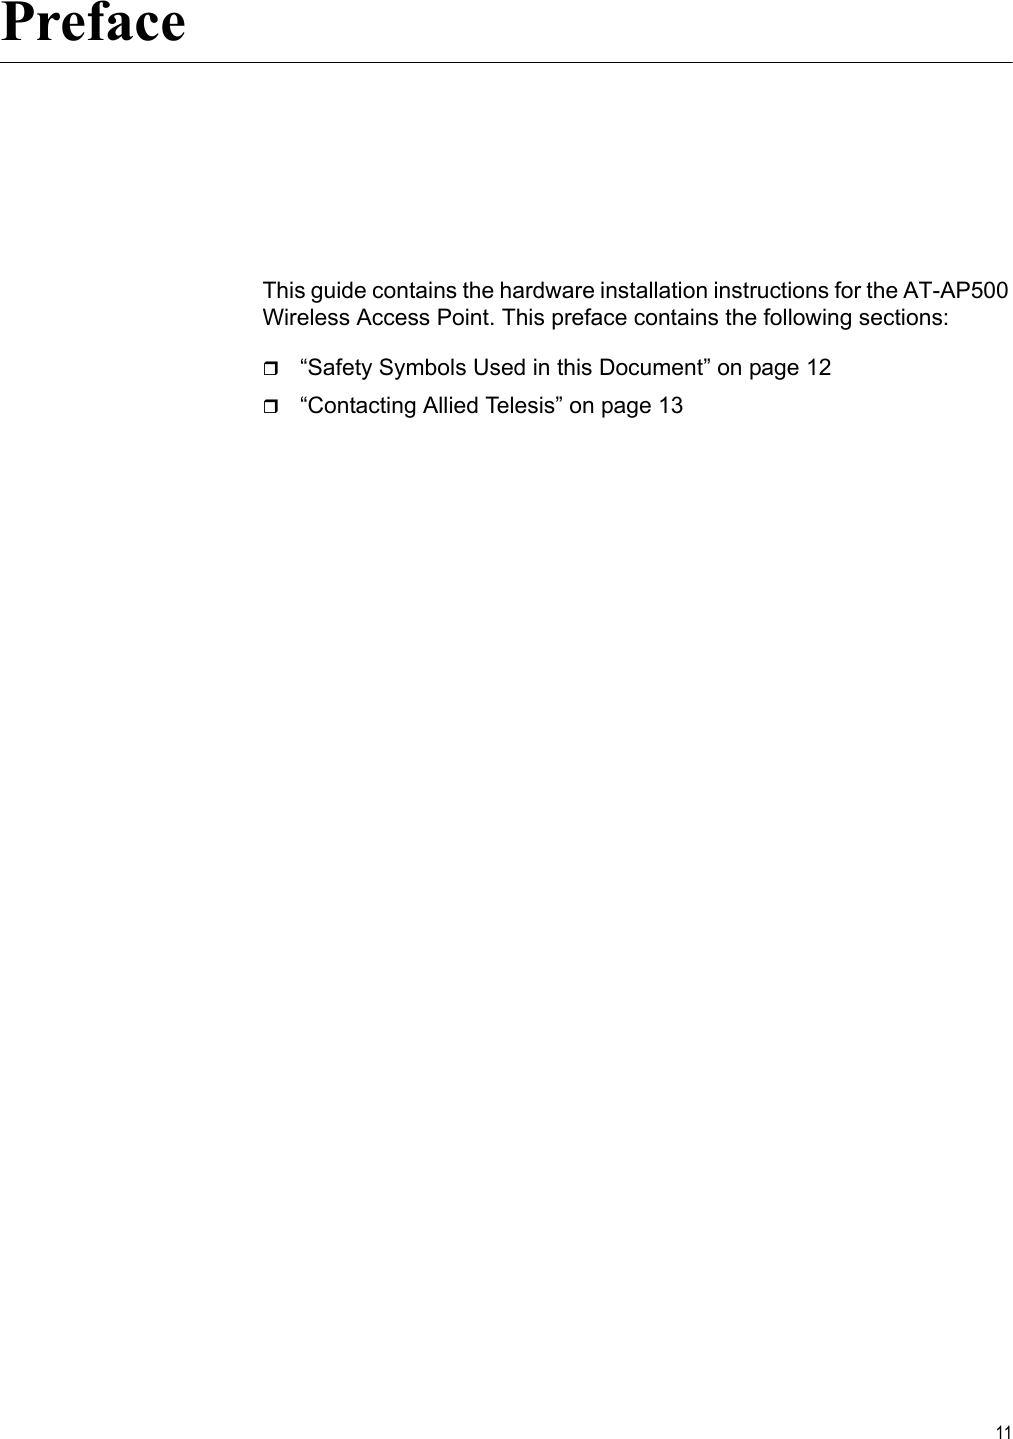 11PrefaceThis guide contains the hardware installation instructions for the AT-AP500 Wireless Access Point. This preface contains the following sections:“Safety Symbols Used in this Document” on page 12“Contacting Allied Telesis” on page 13 Review Draft 2-1-16